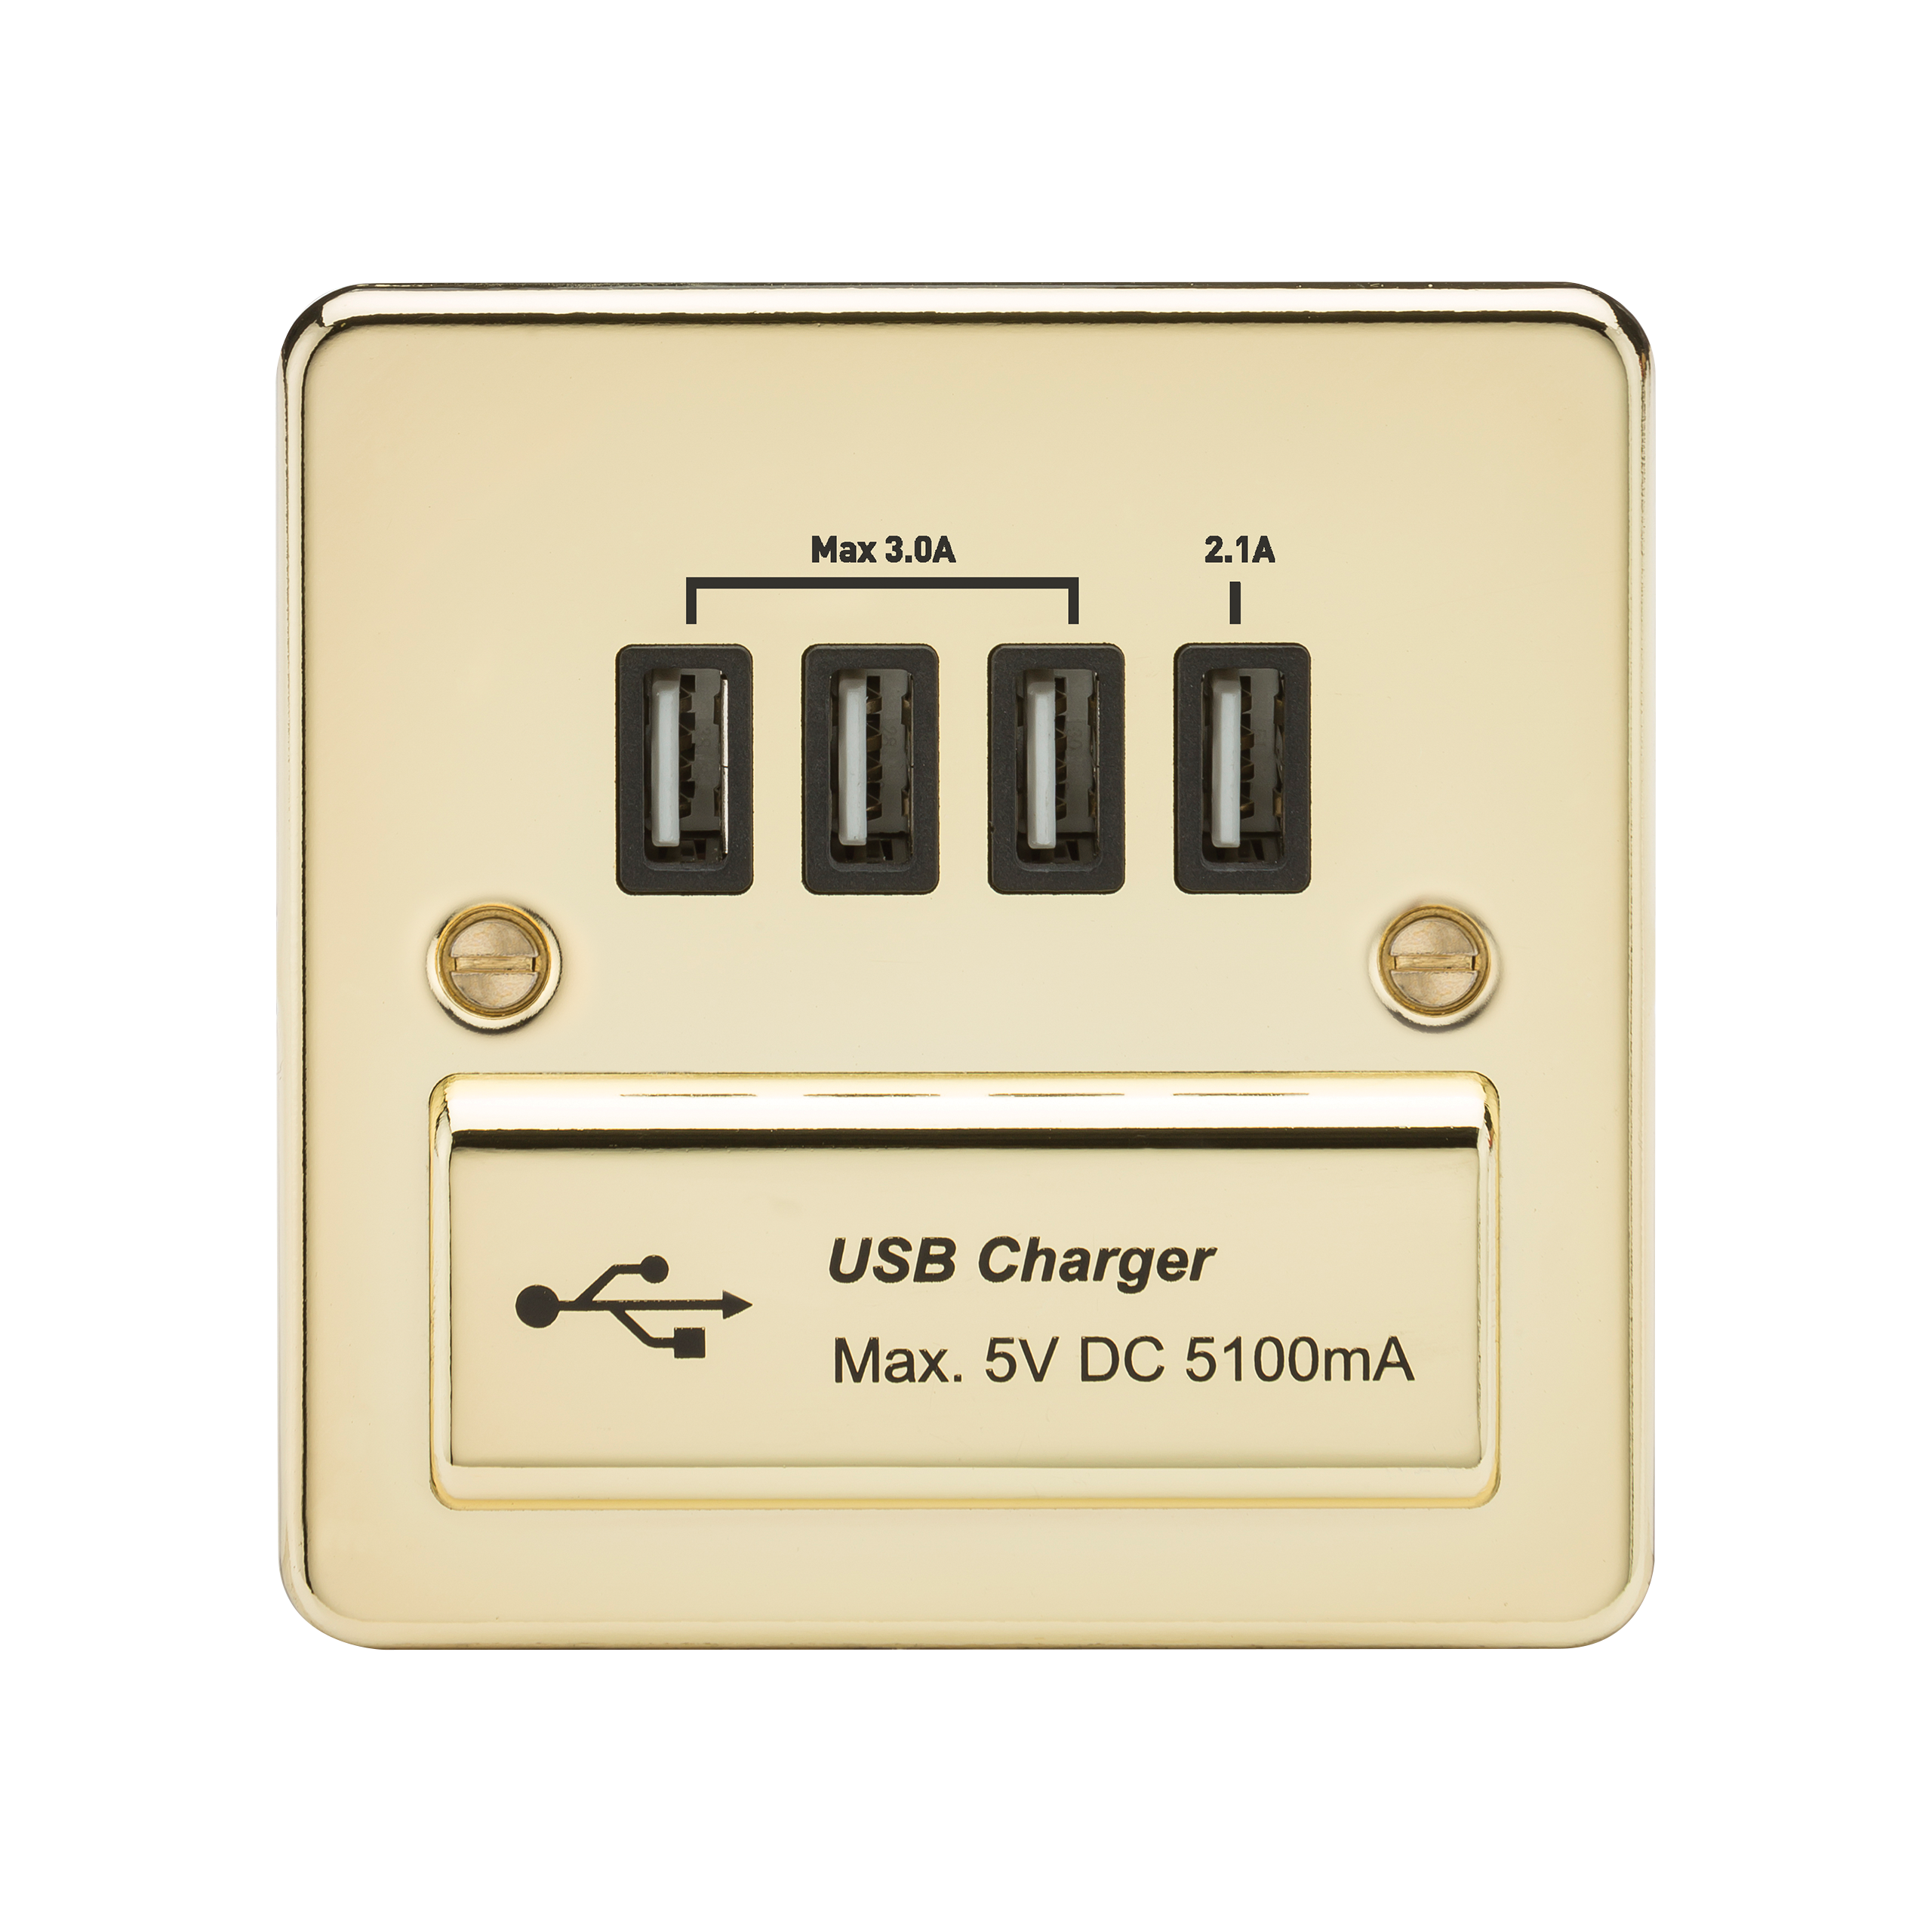 Flat Plate Quad USB Charger Outlet - Polished Brass With Black Insert - FPQUADPB 